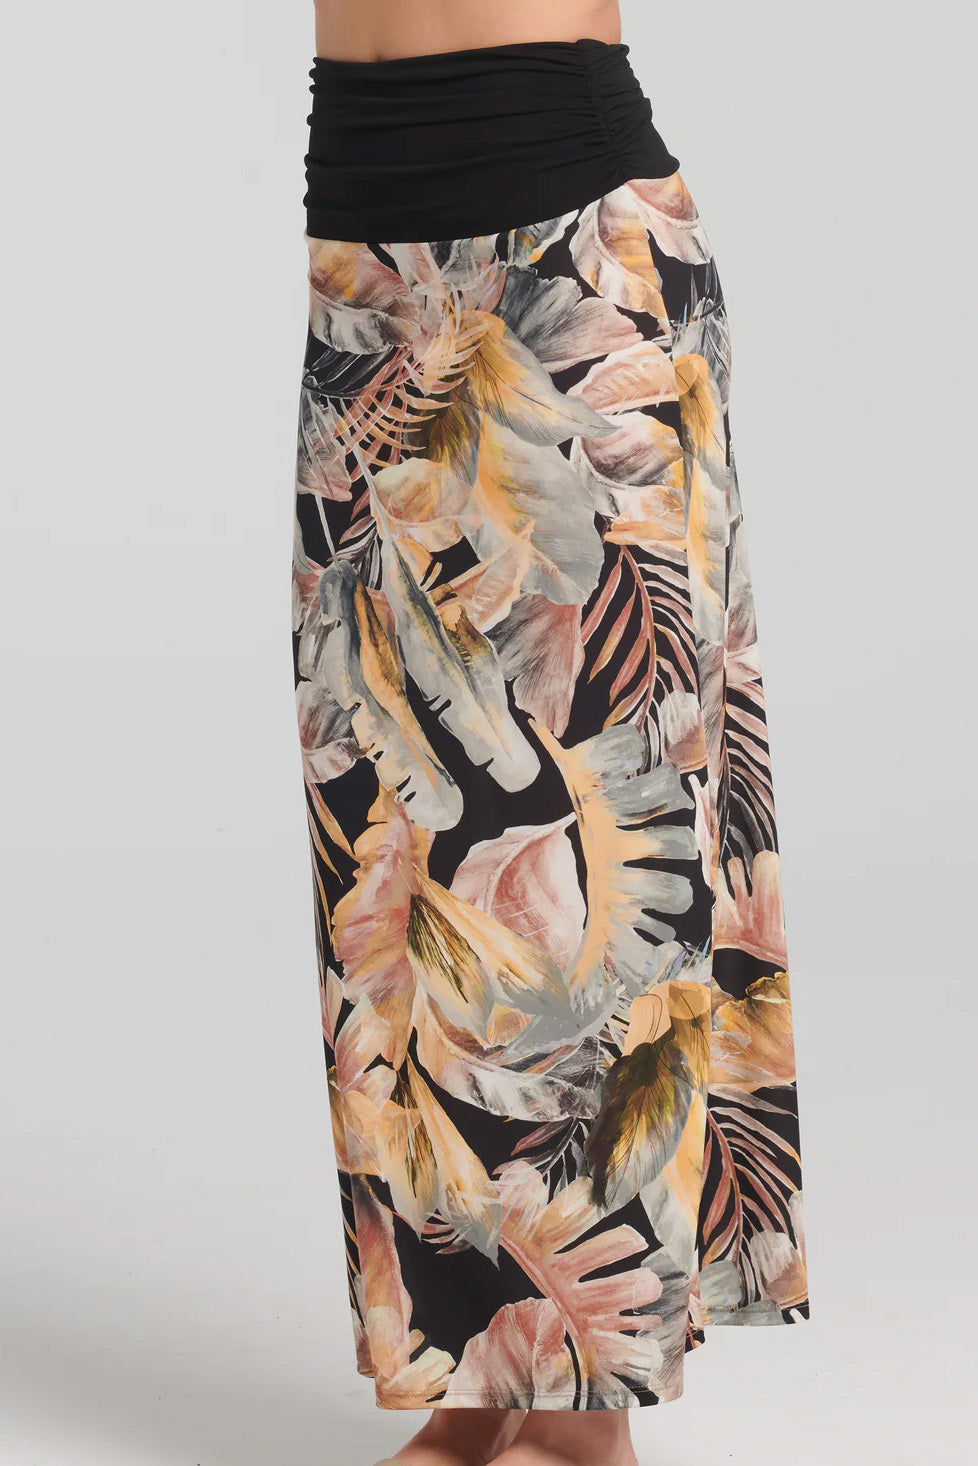 Divona Skirt by Kollontai, side view, wide black band at top, neutral toned tropical print below, wear as a strapless midi dress or a maxi skirt, sizes XS to XXL, made in Quebec